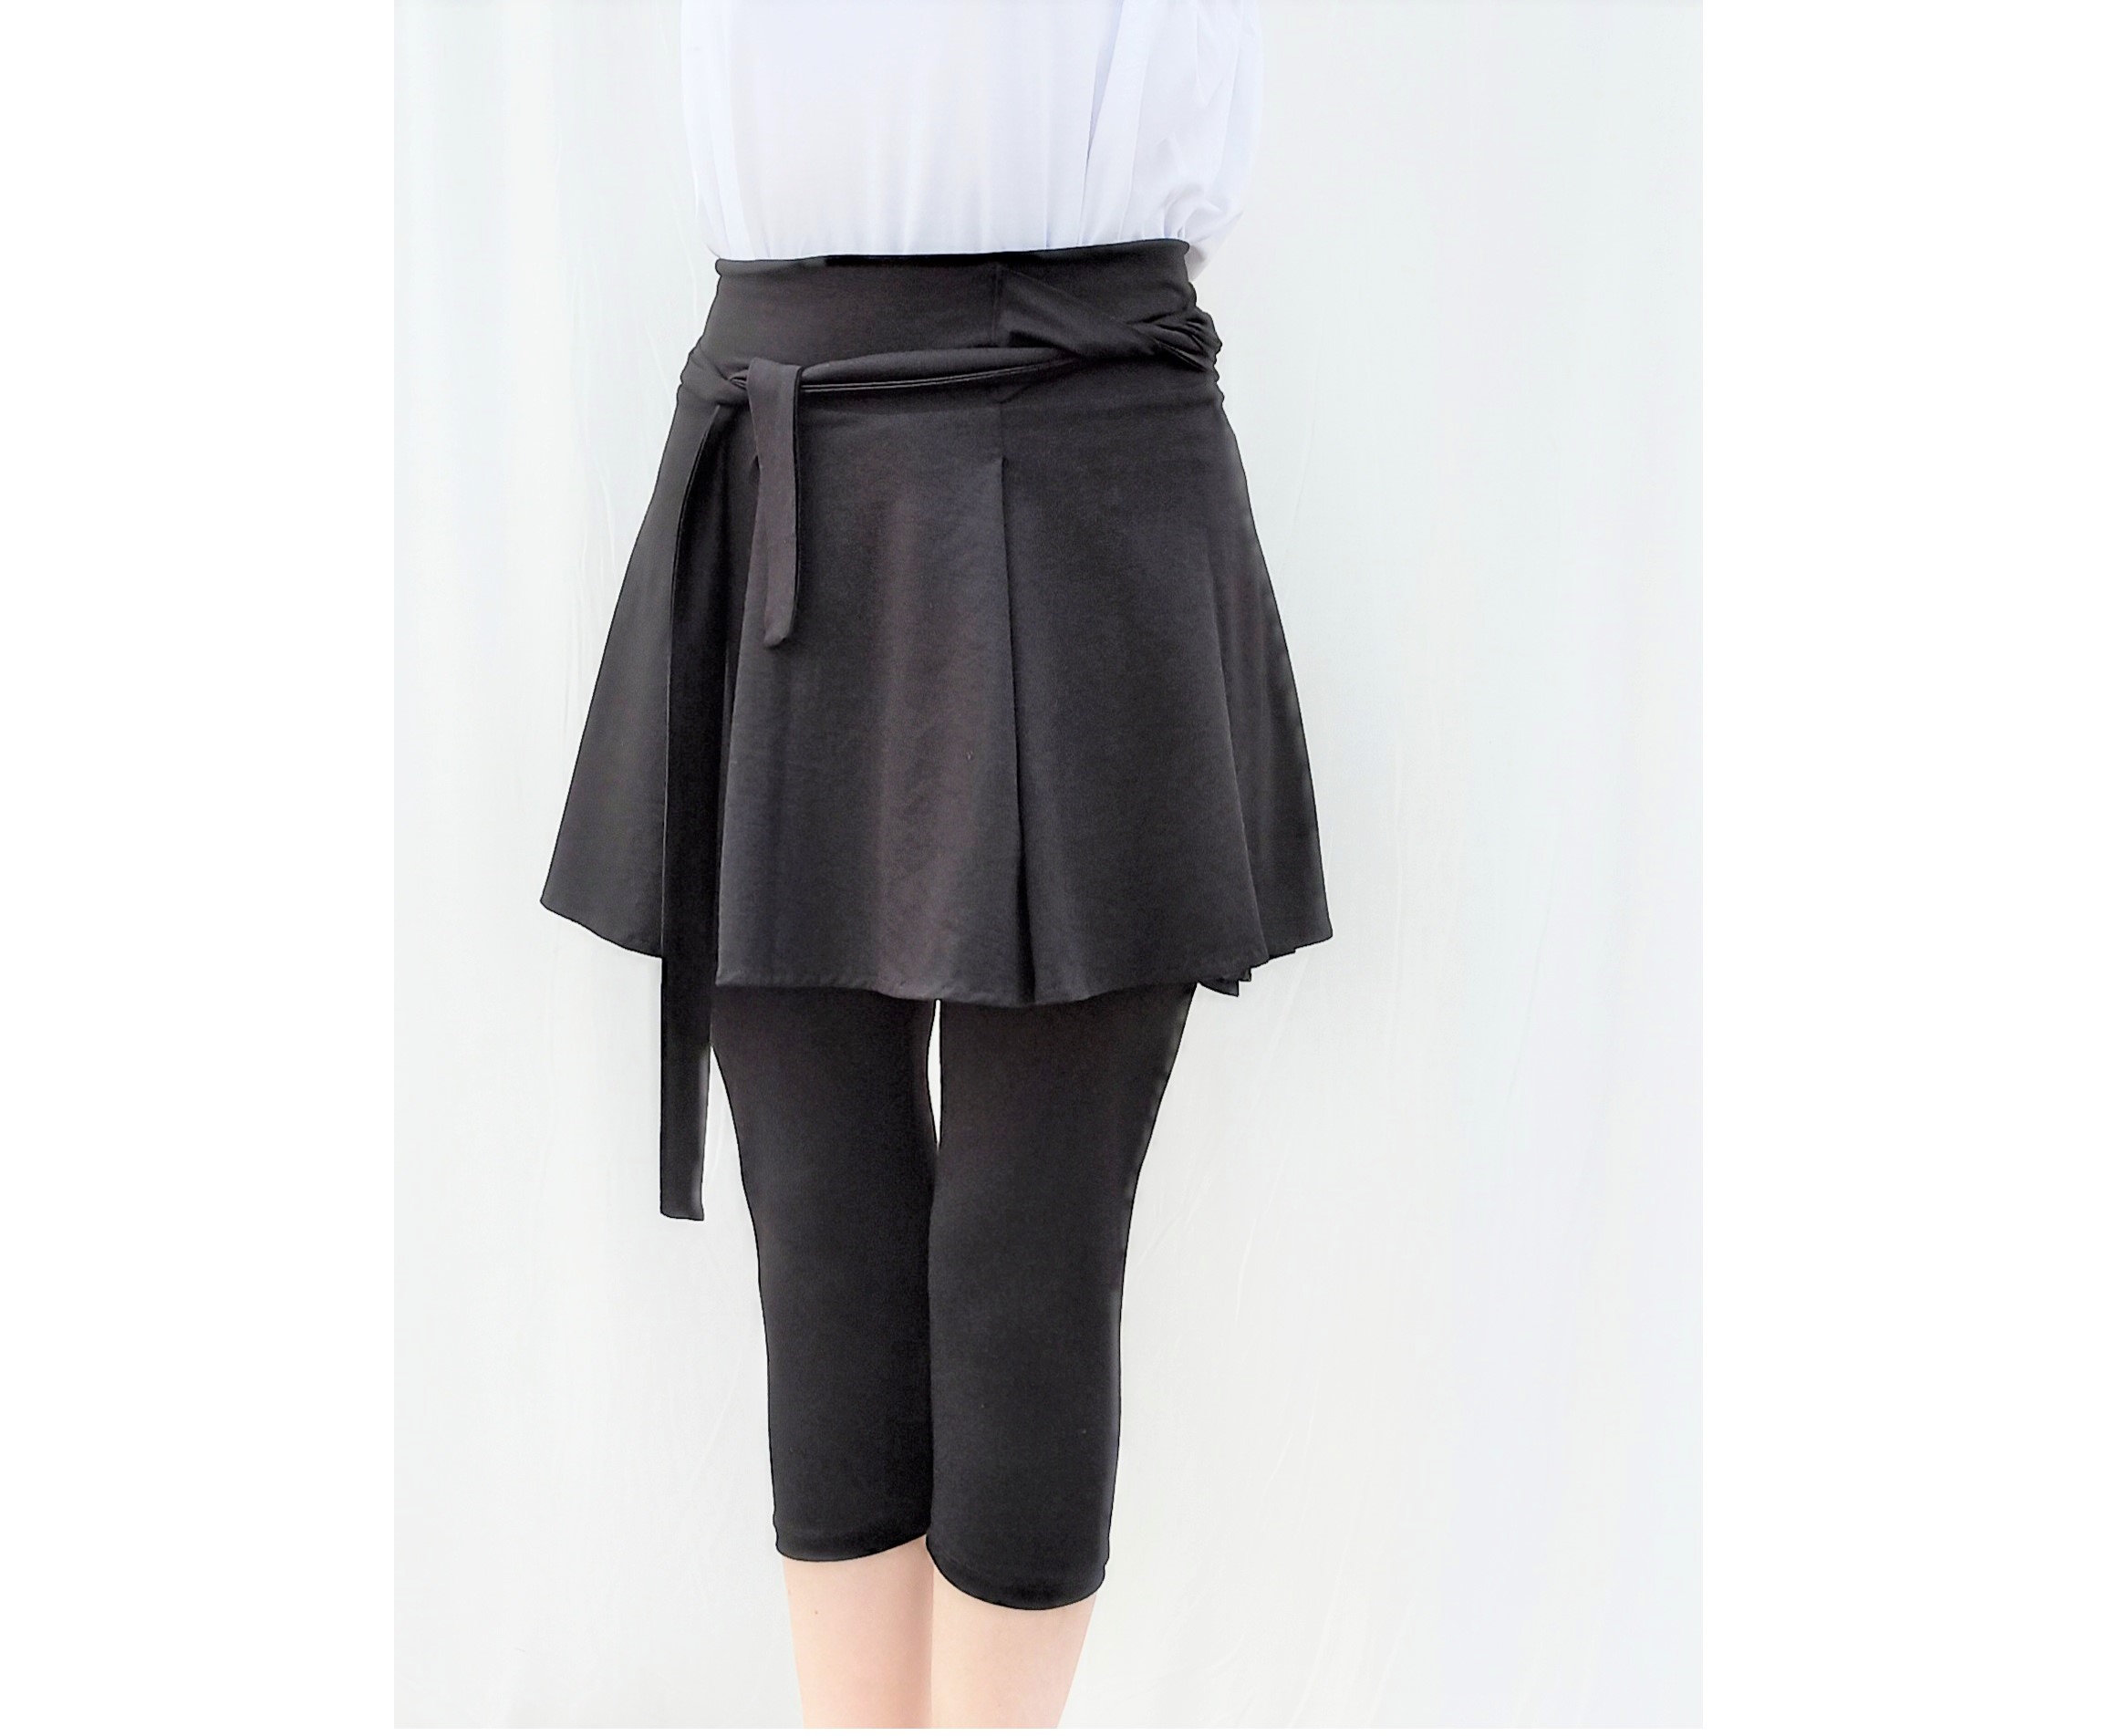 Women's Leggings With a Skirt, Yoga Pants With an Attached Skirt, Leggings  With Shorts -  Canada